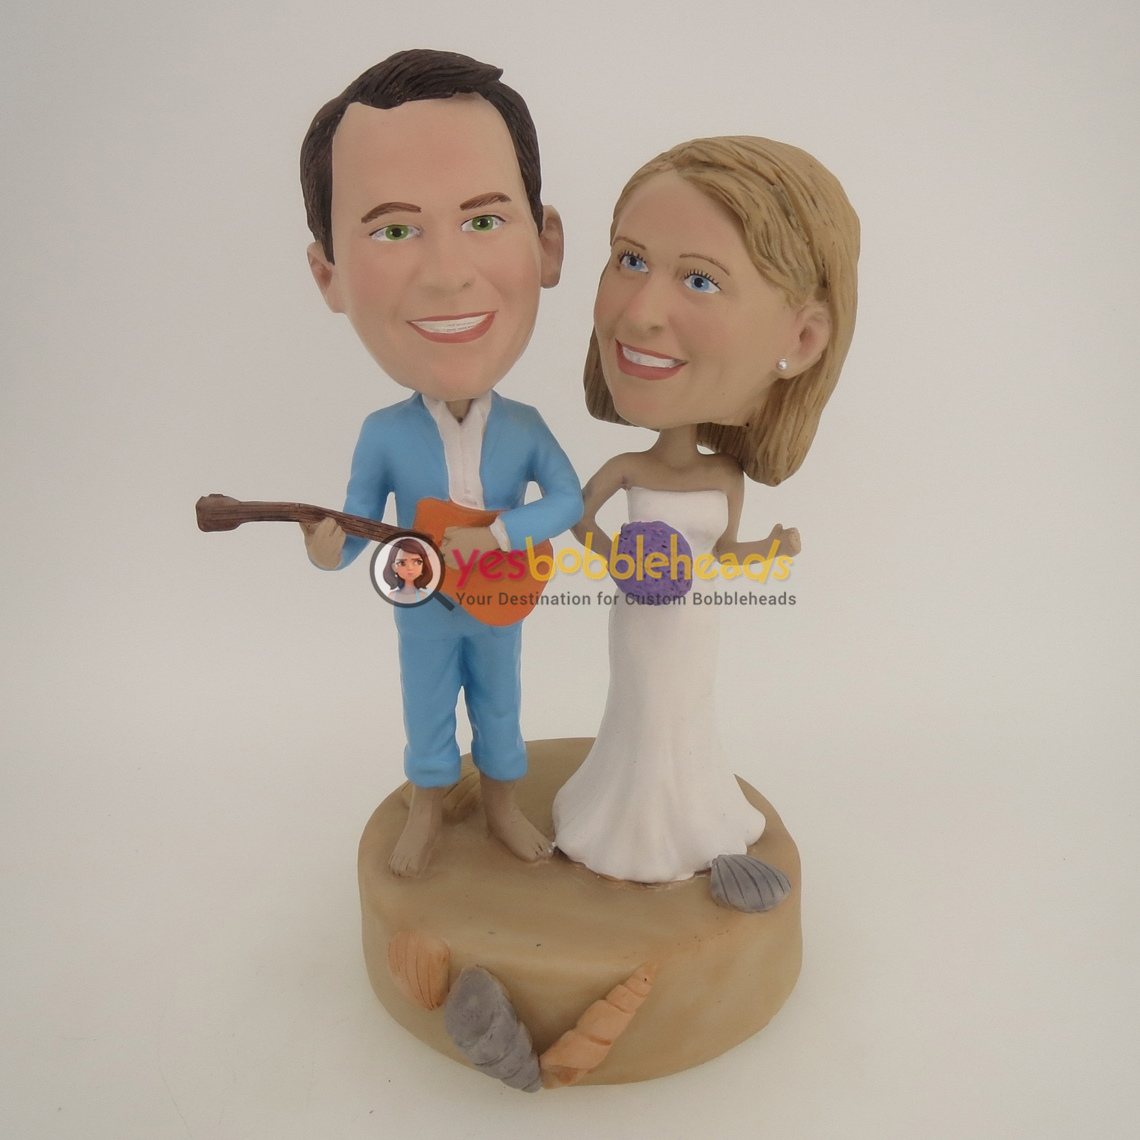 Picture of Custom Bobblehead Doll: The Couple Beach Time Fun 